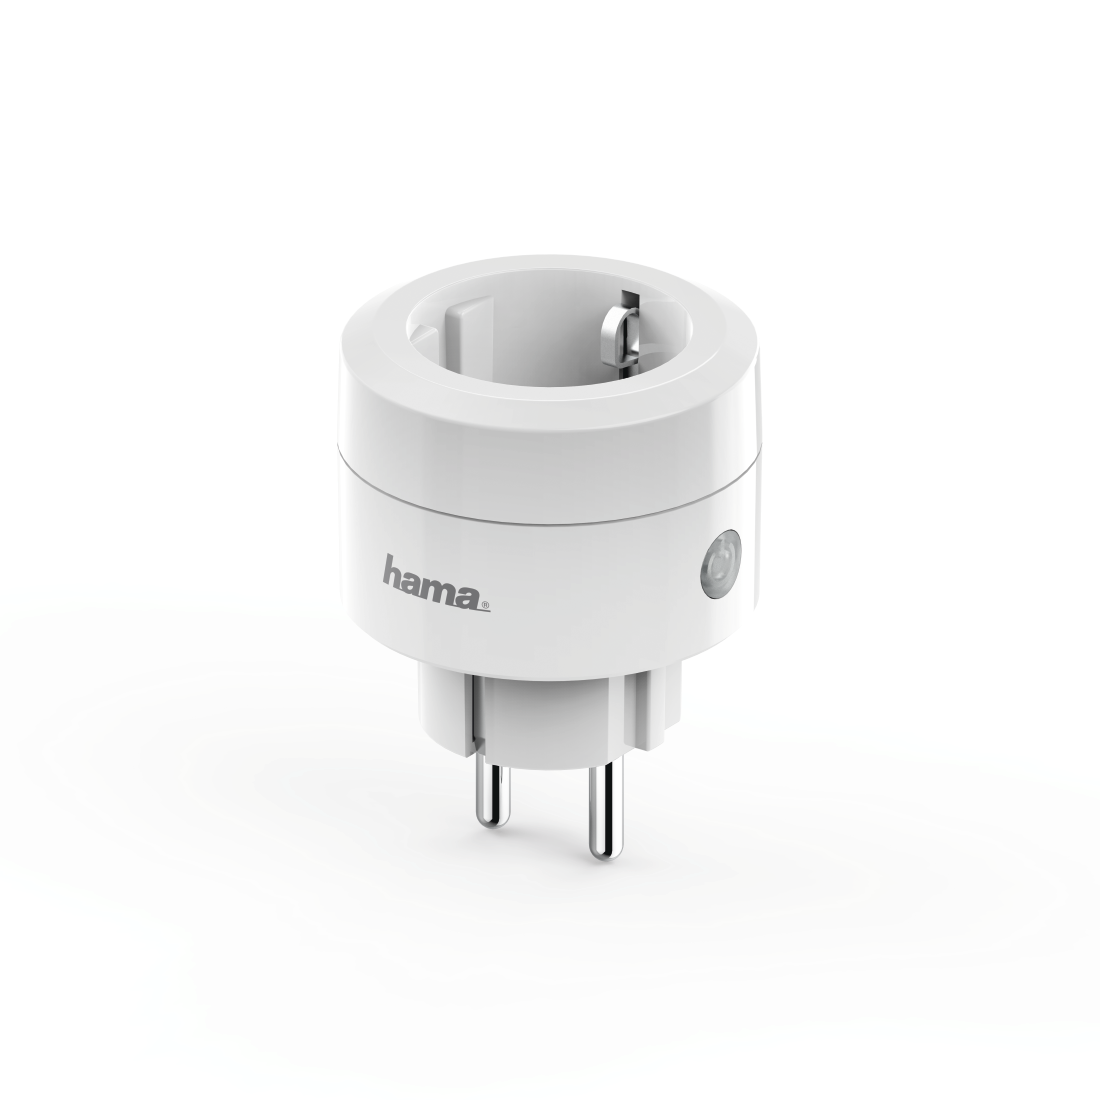 00176567 Hama "Basic" WLAN Socket, without Hub, for Voice and App Control,  2,300 W, 10 A